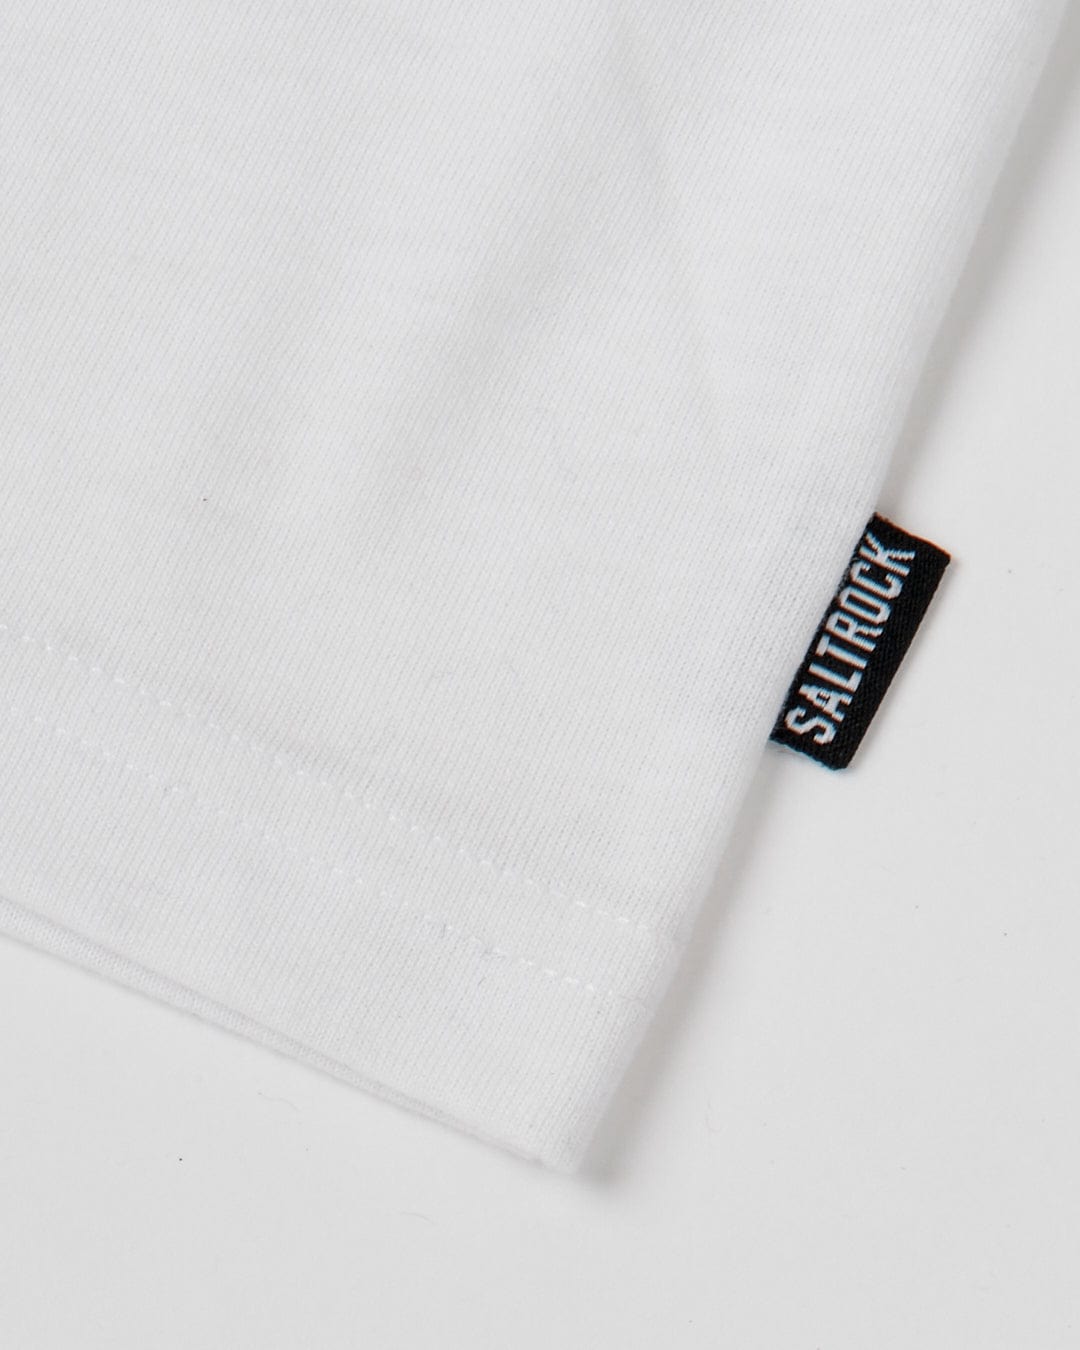 A close-up image of a Saltrock Original - Mens Short Sleeve T-Shirt in white fabric with a visible crew neckline and a small black label with the word "Saturday" in white letters.